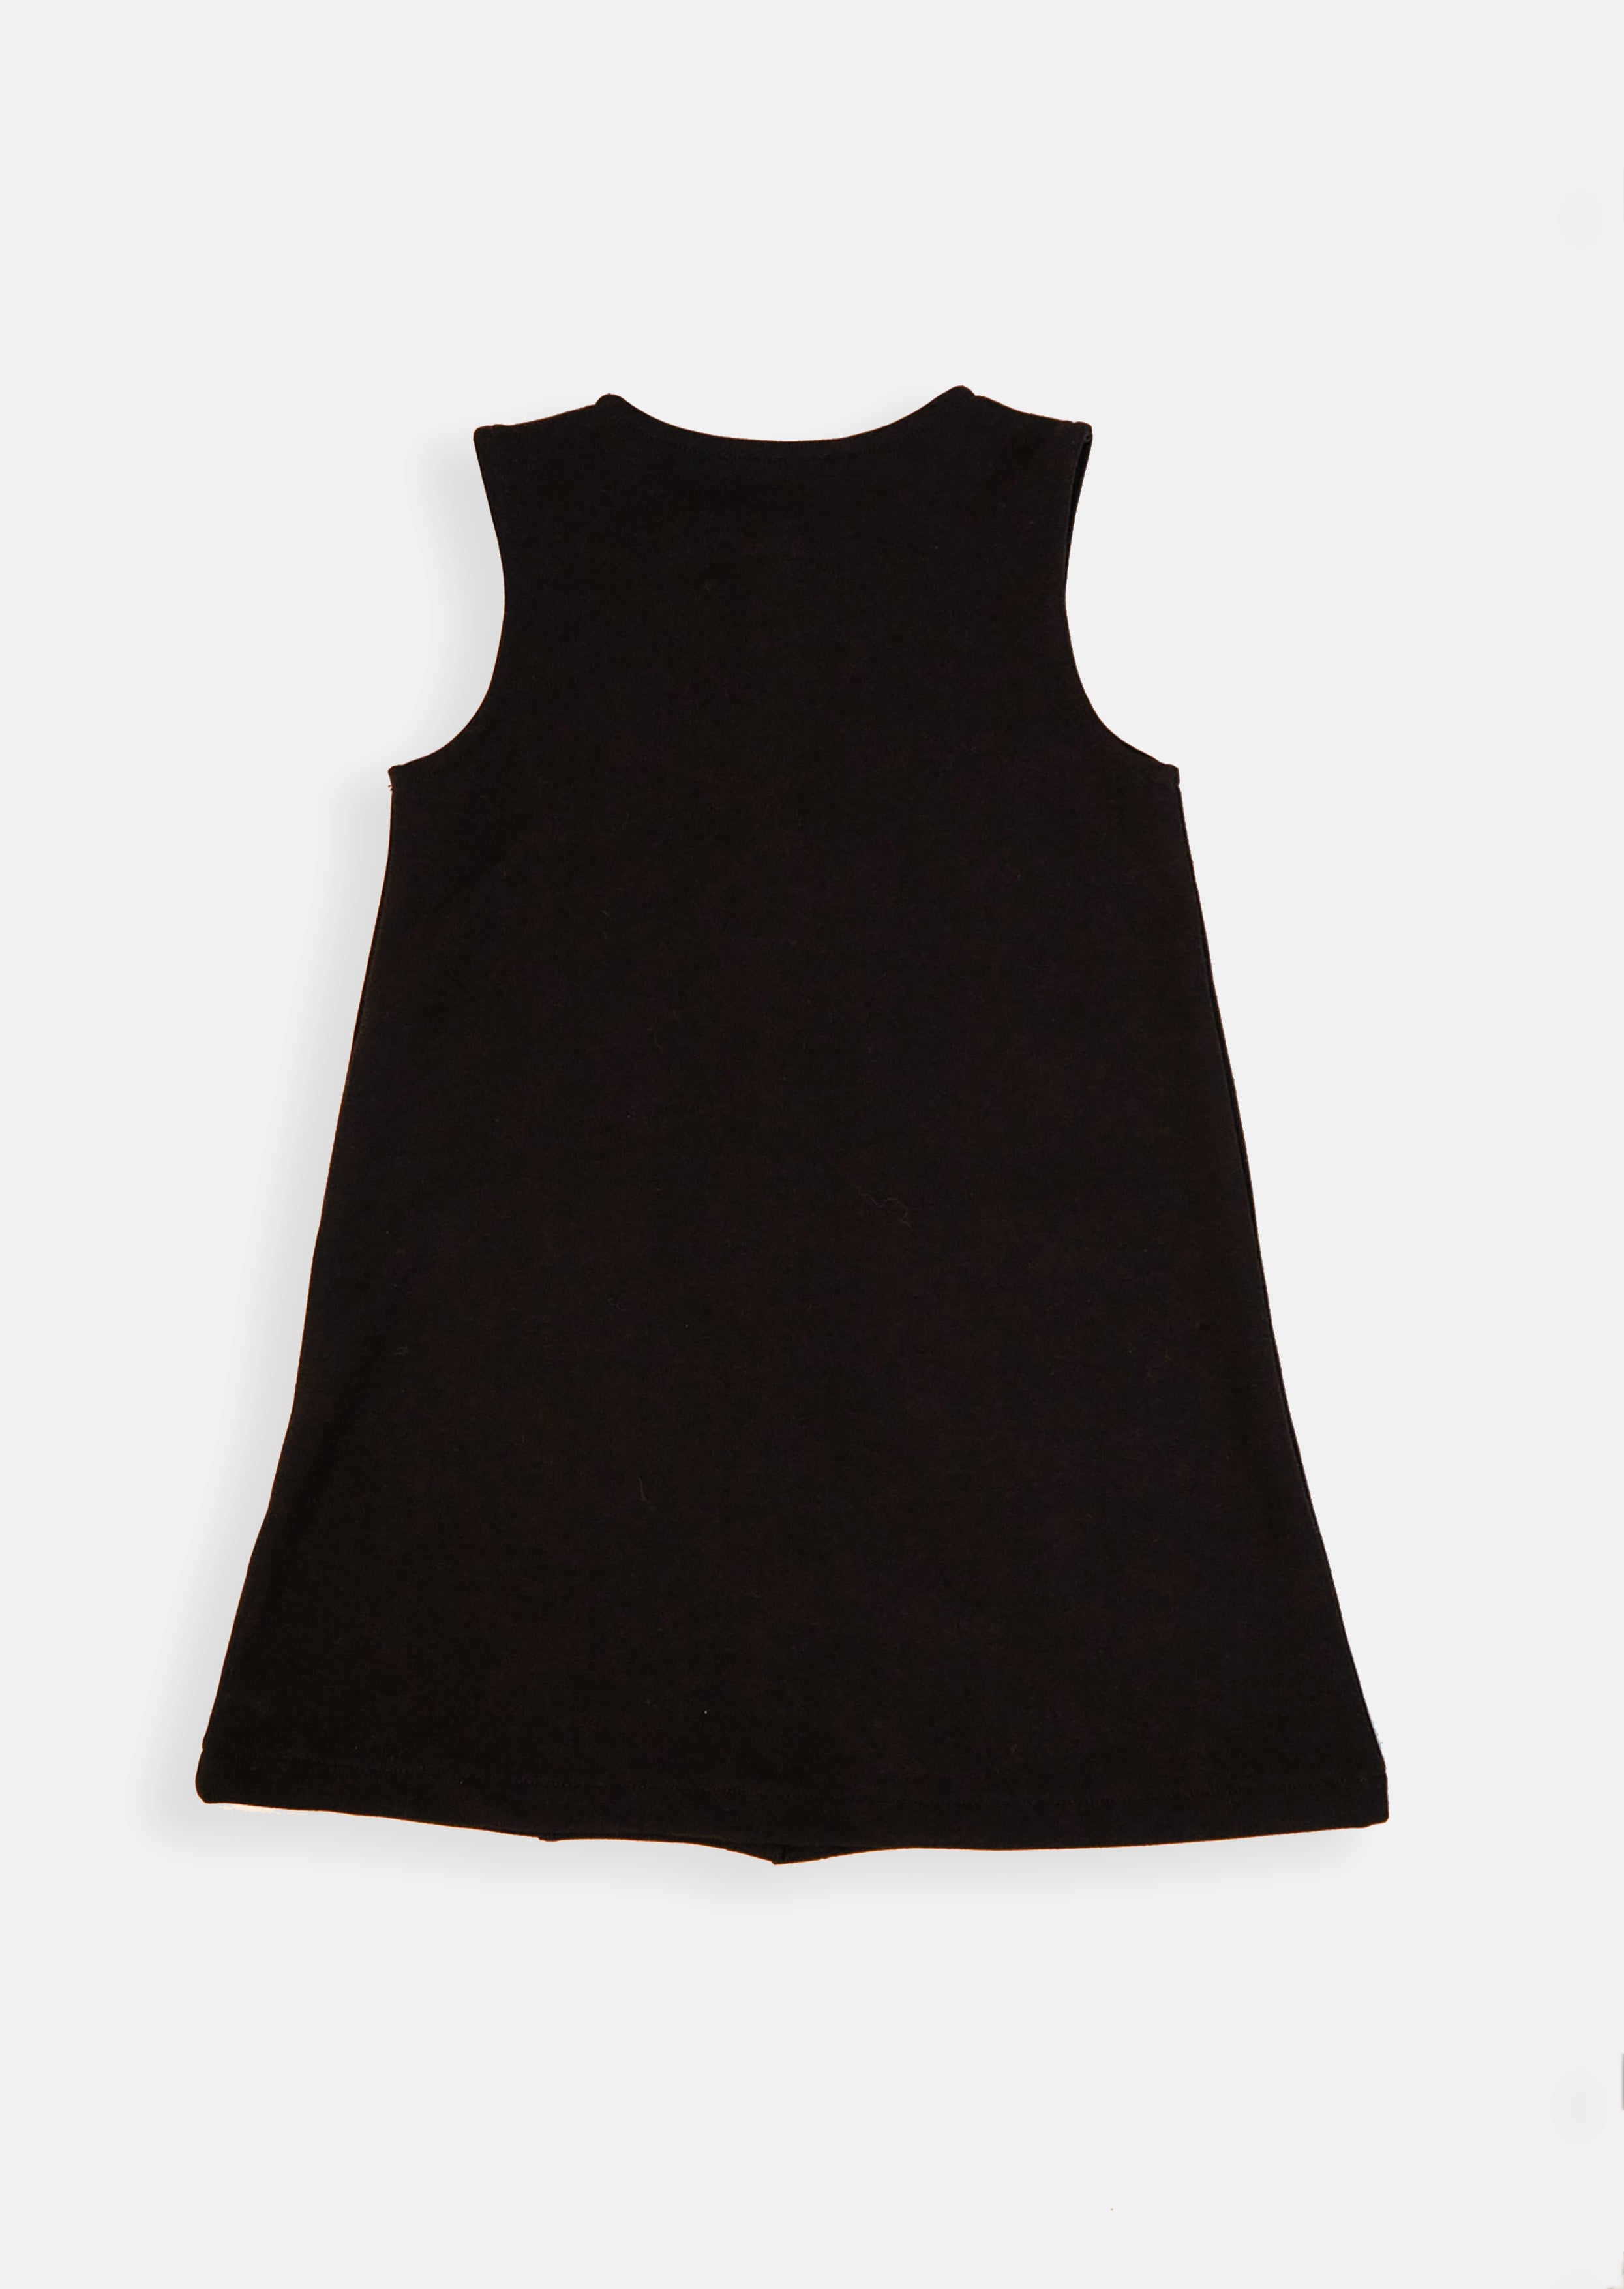 Girls Solid Black Pinafore Woven Dress